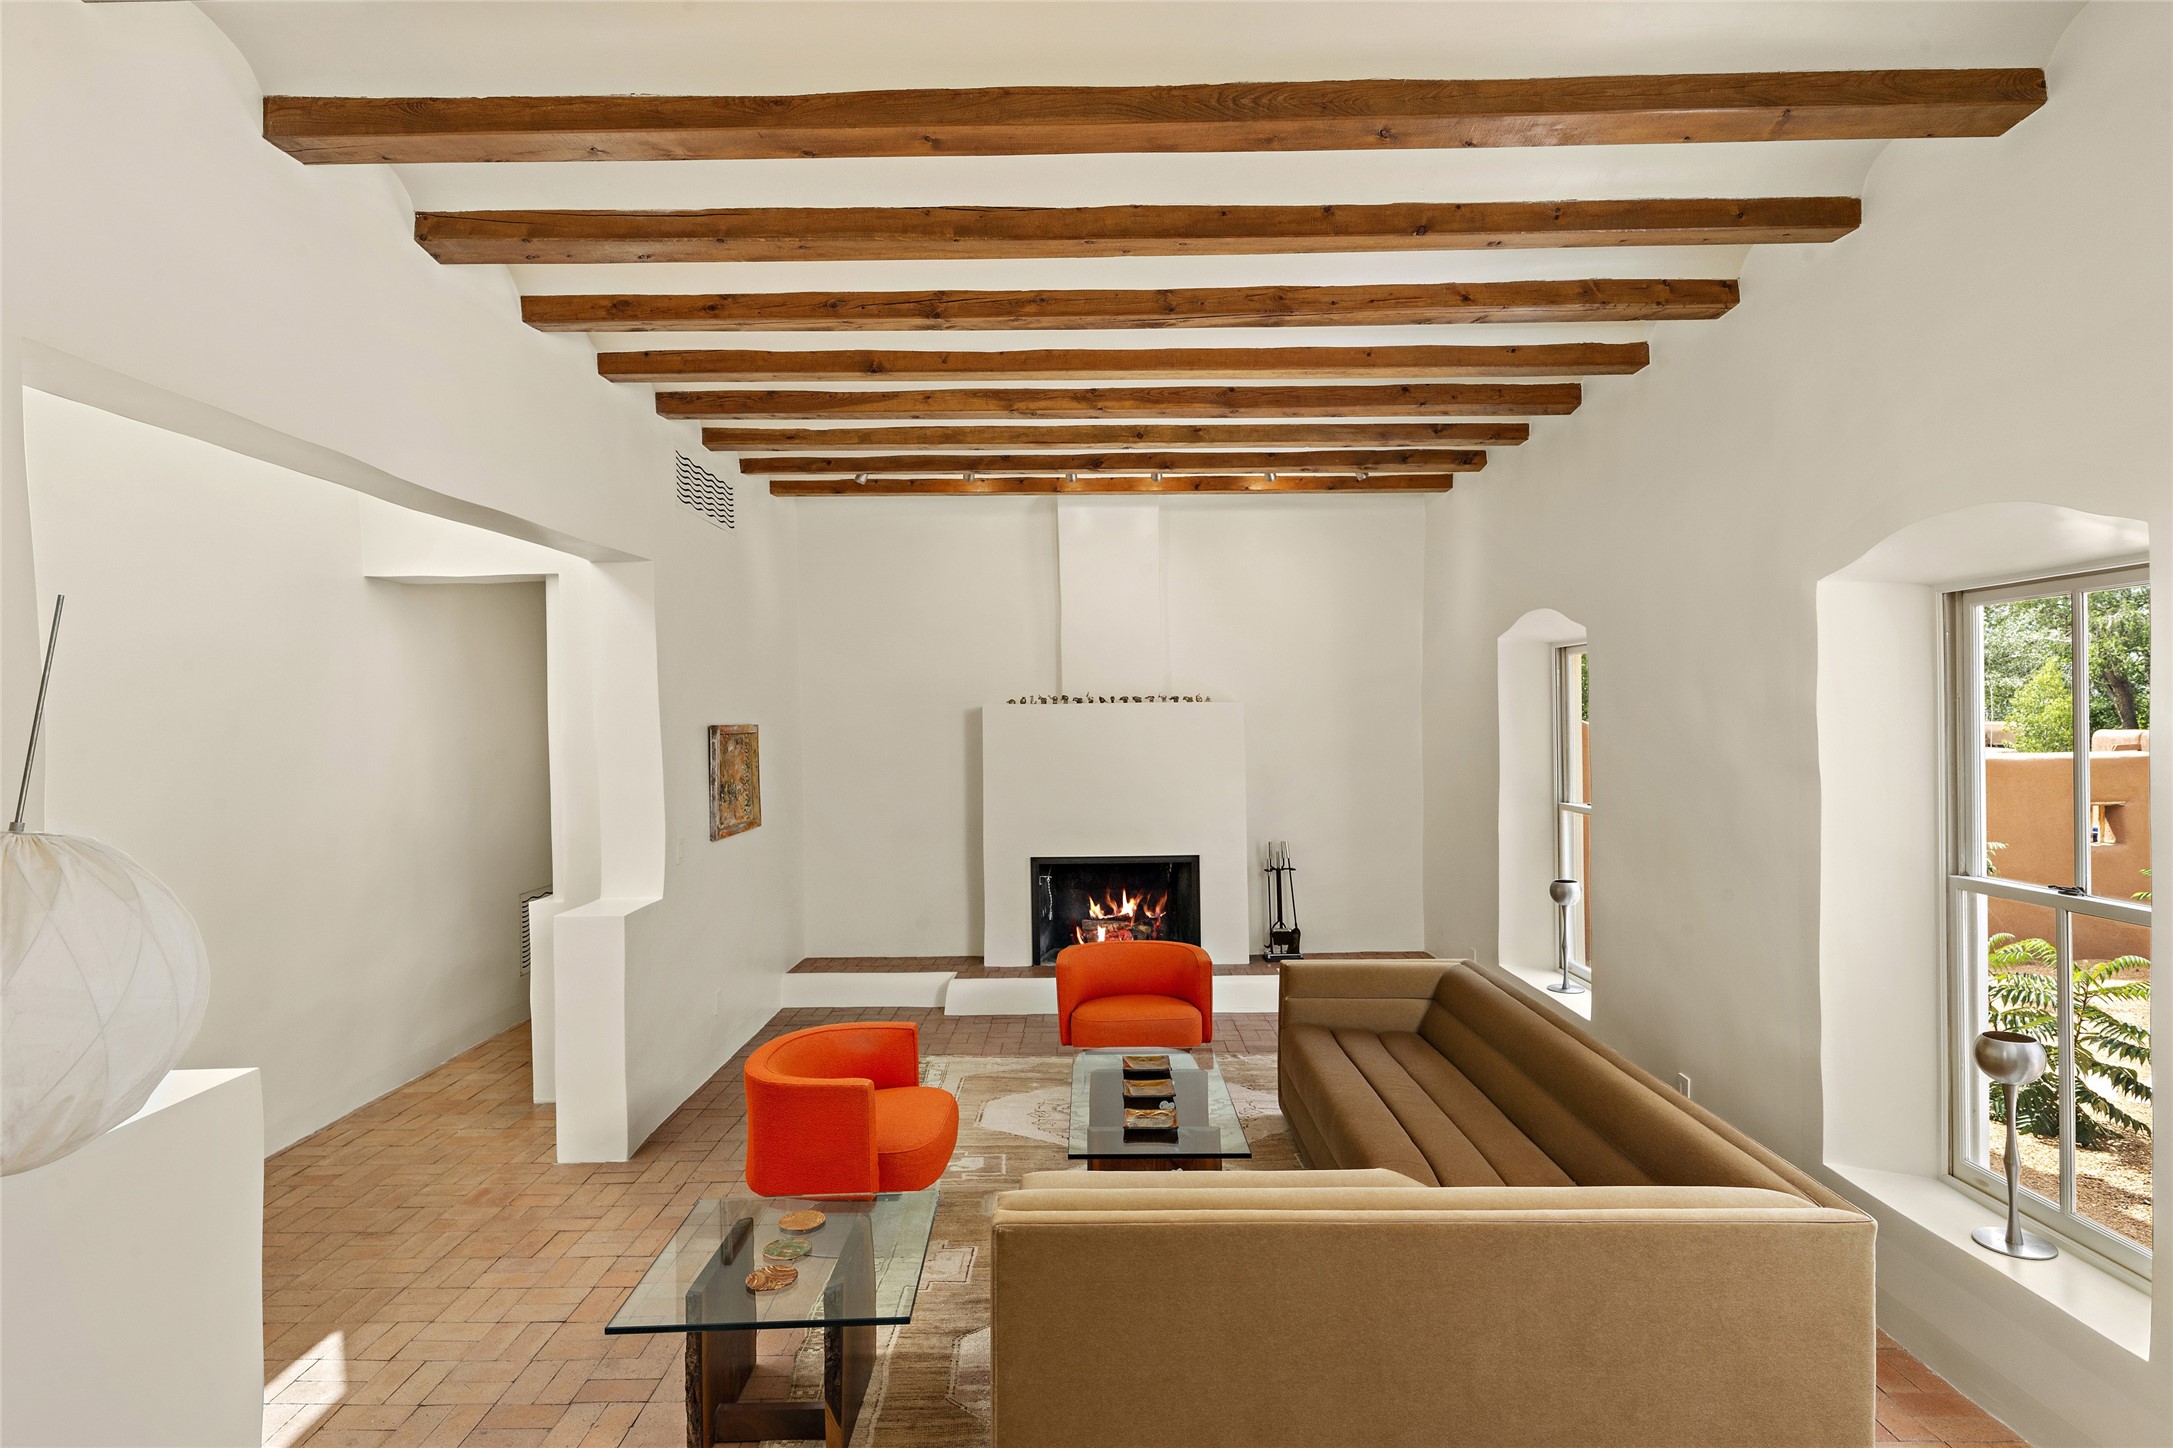 The living Room has high beamed ceilings & adobe walls with a raised fireplace